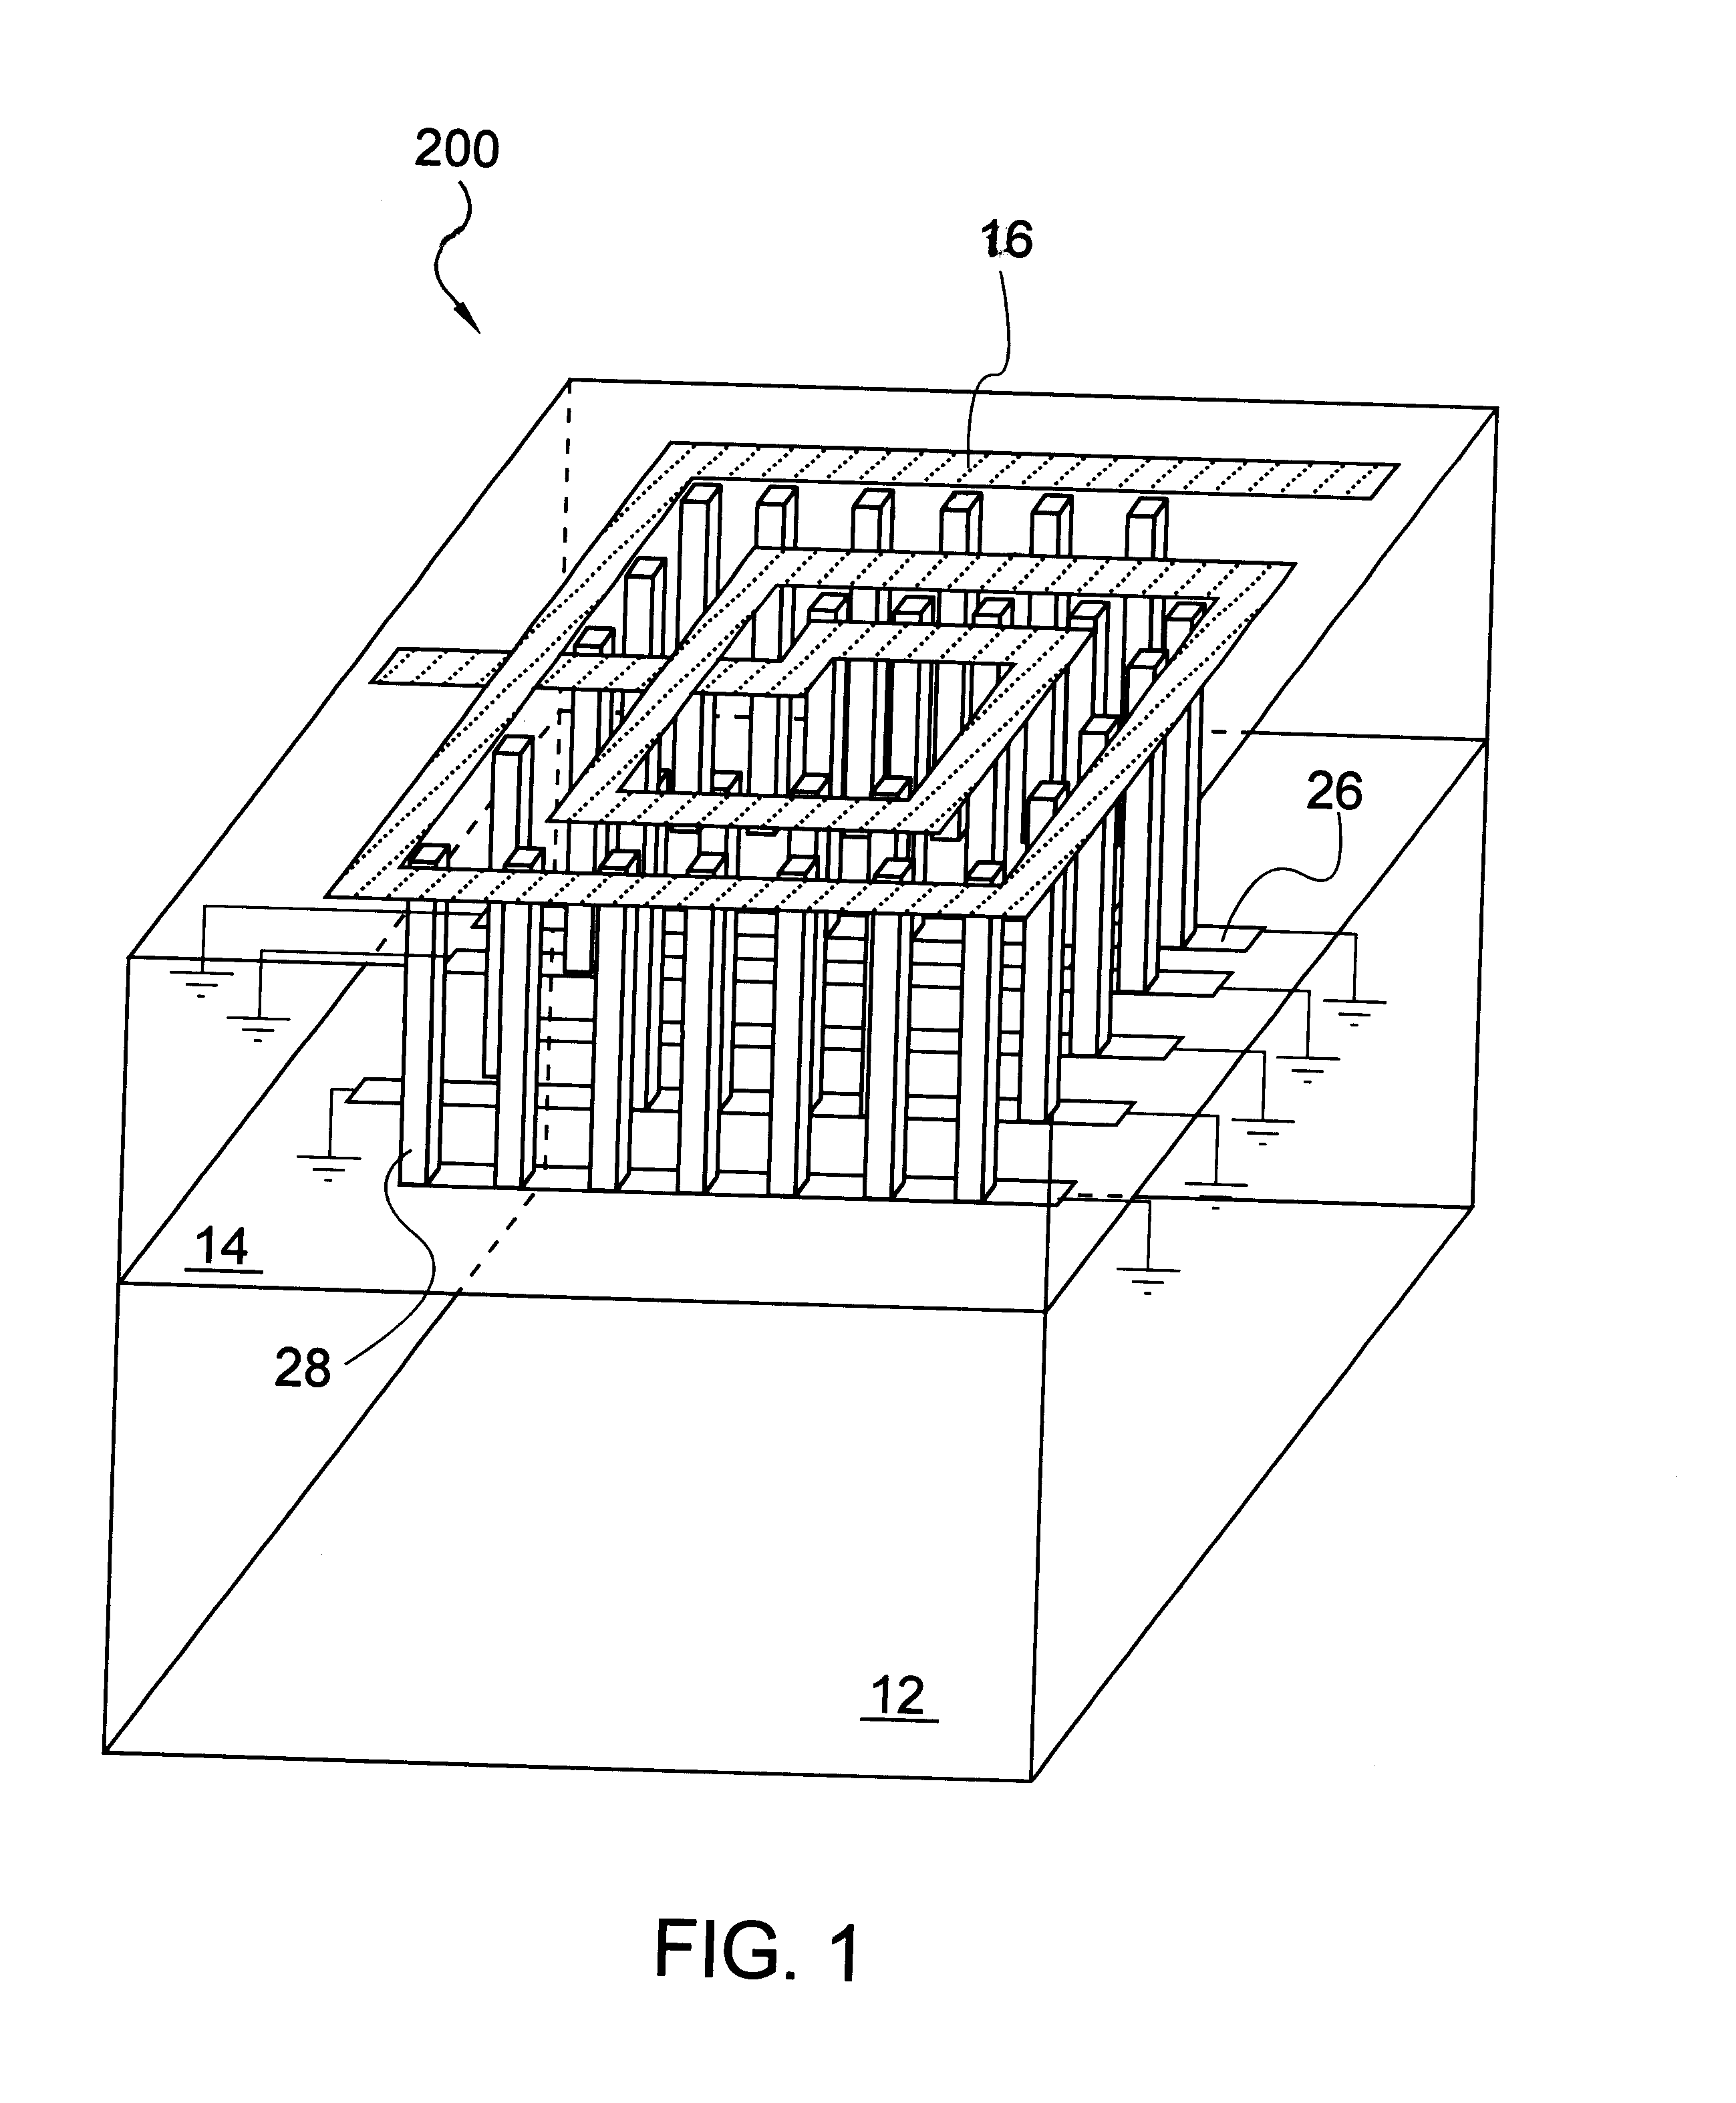 Spiral inductor semiconducting device with grounding strips and conducting vias